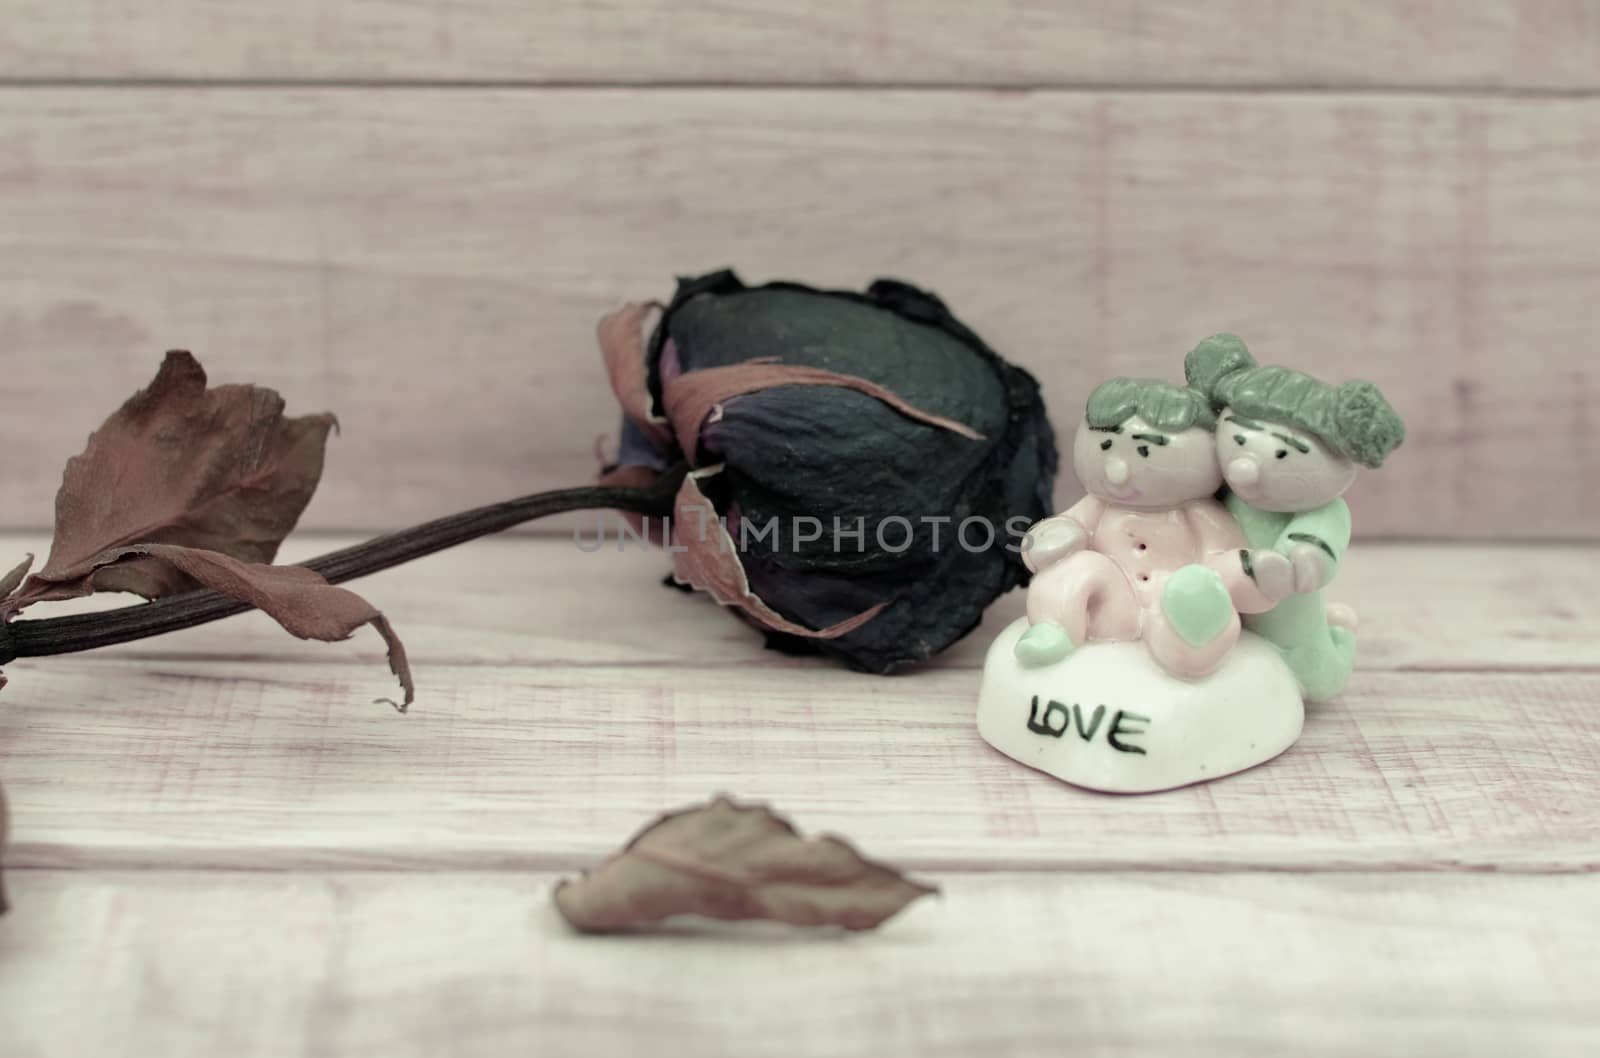 Dry roses and ceramic doll on wood pattern background. Dry roses with boy and girl ceramic doll with love text on wood background. Fill color effect in white balance.